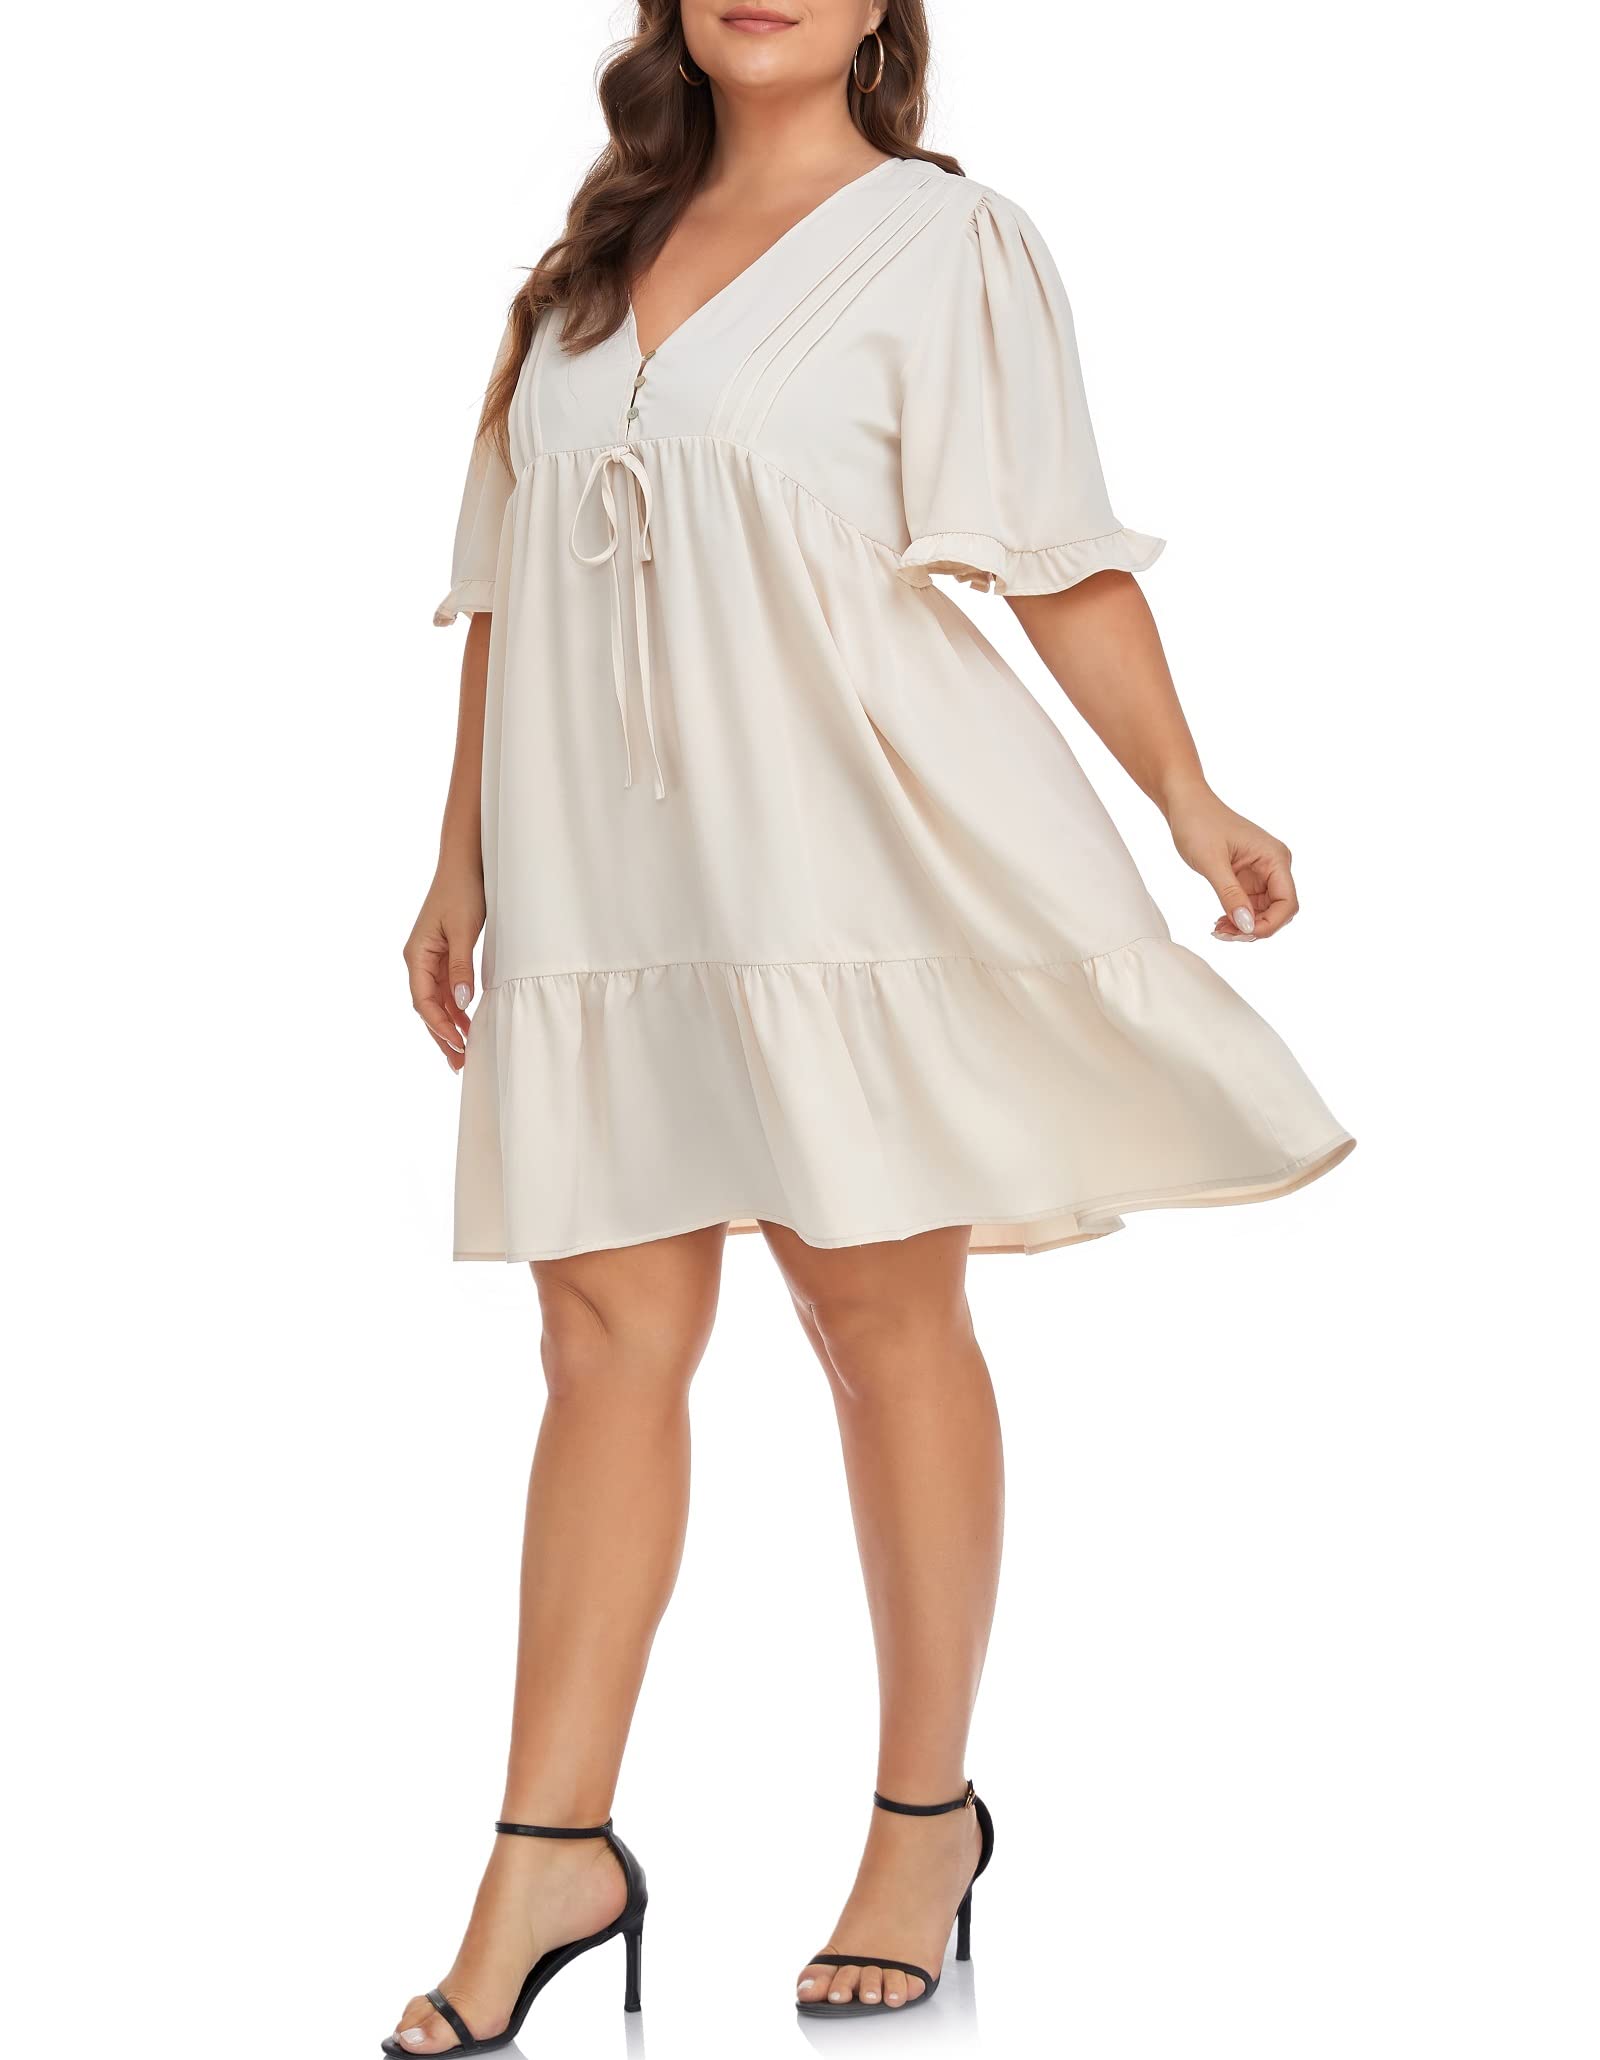 Carrdc Women's Summer Plus Size V Neck Button Down Front Ruffle Sleeve Pleated Dress